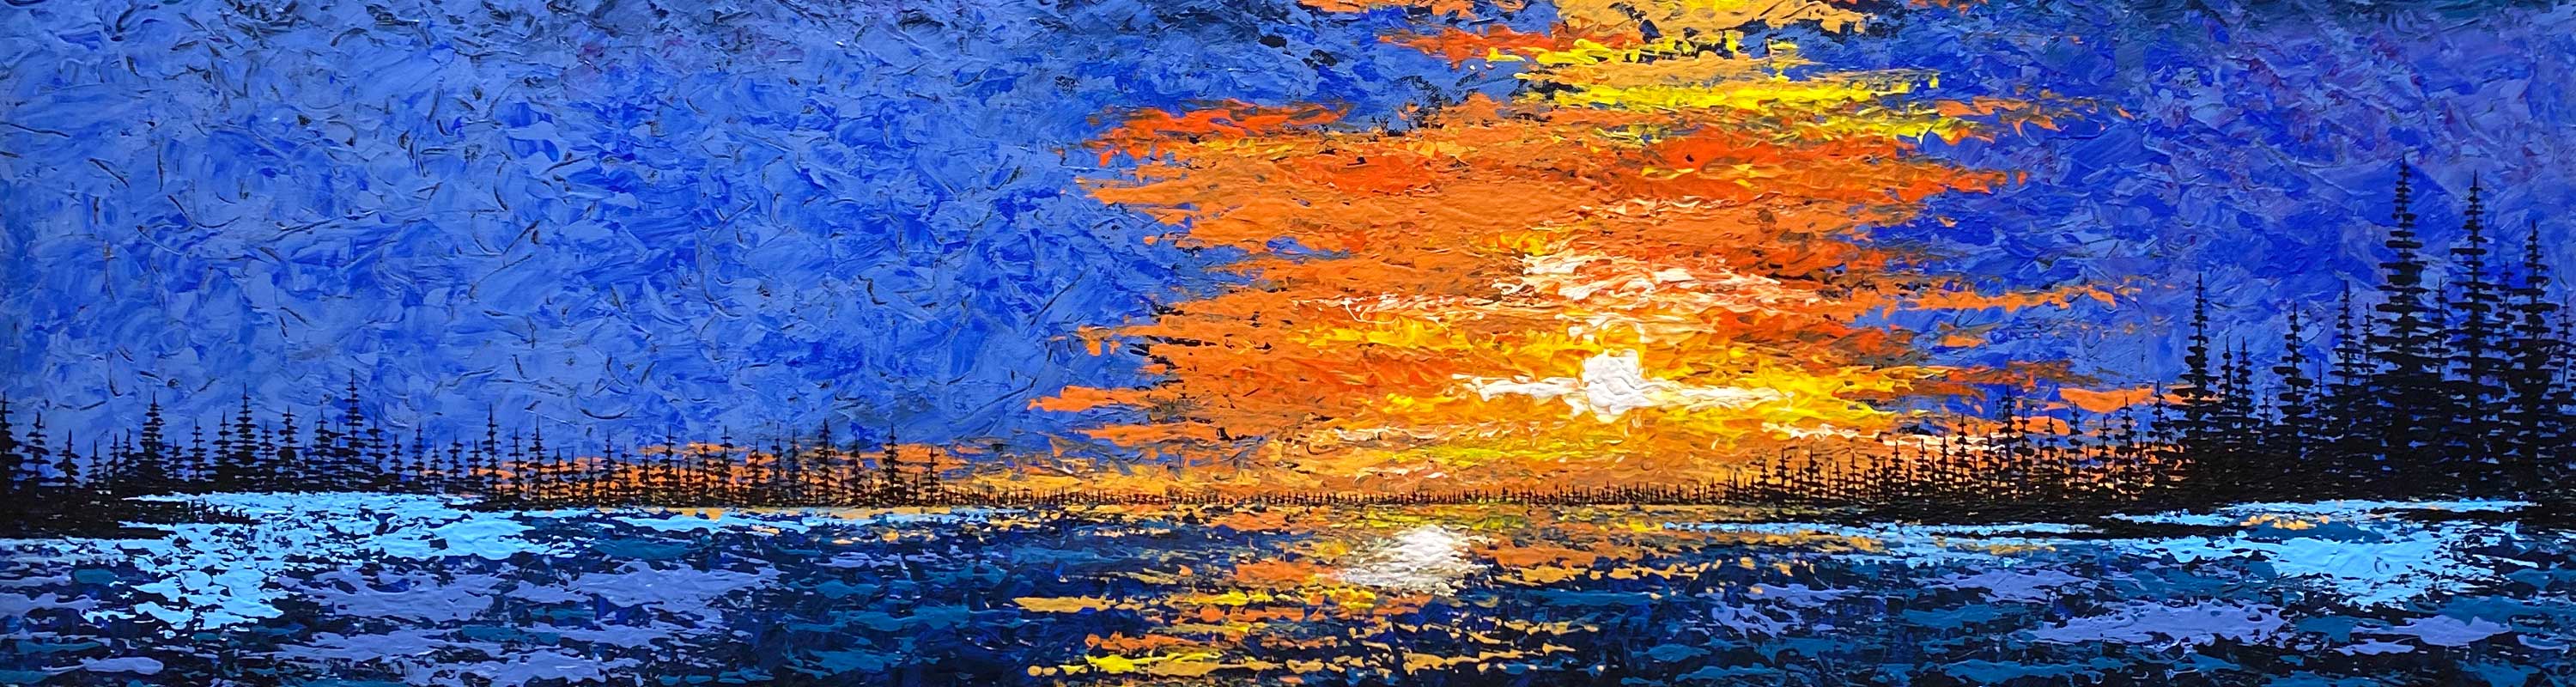 acrylic painting of sunset in vivid blues and oranges